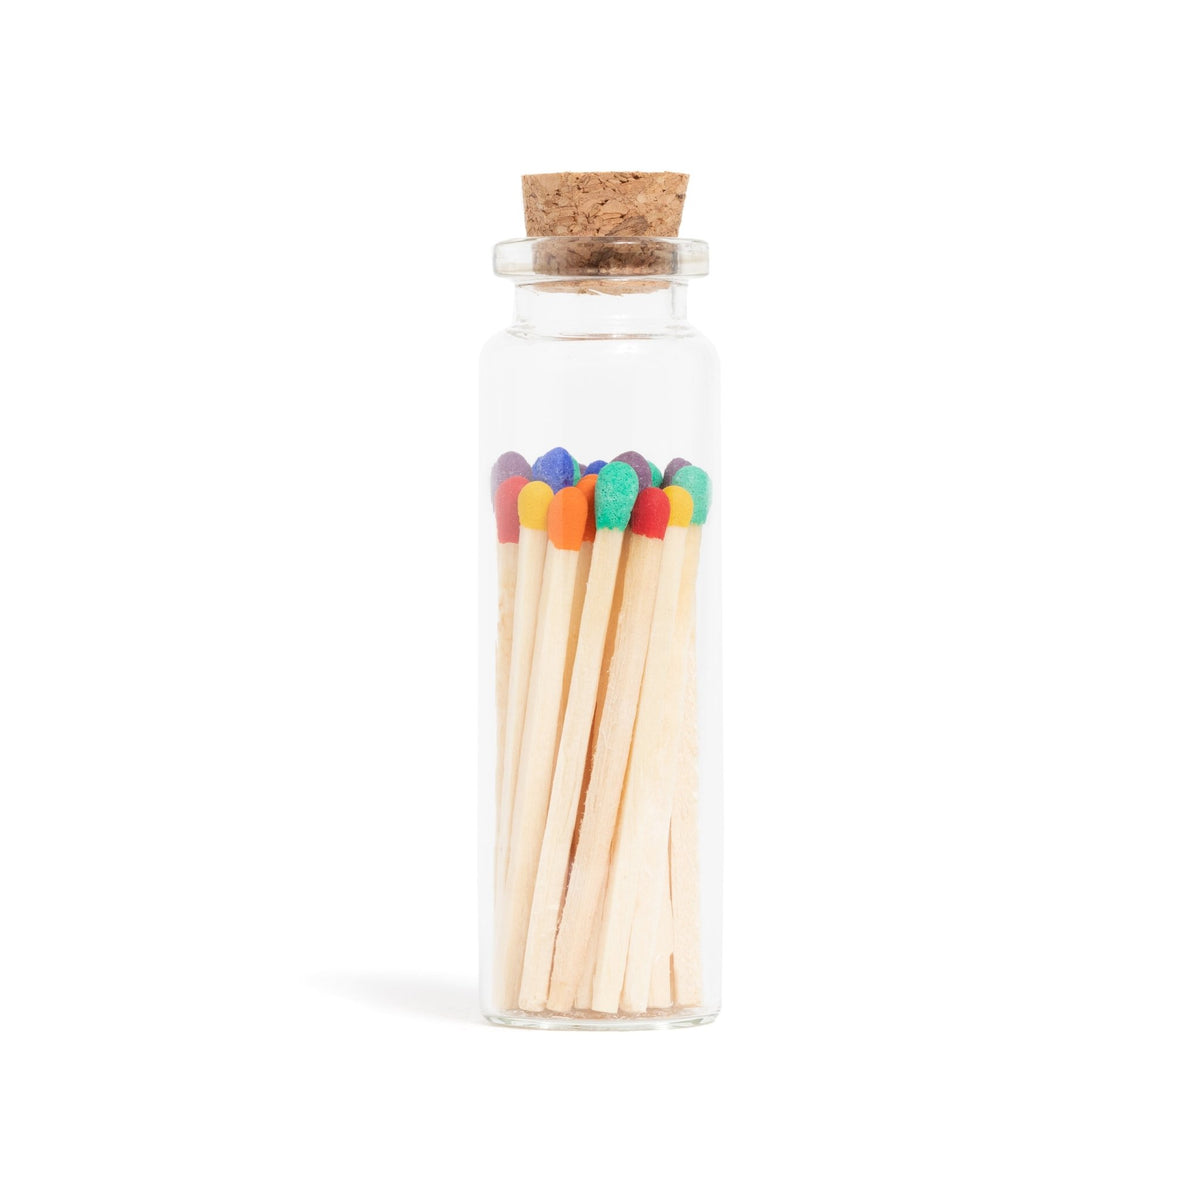 Wood Matches in Corked Vial